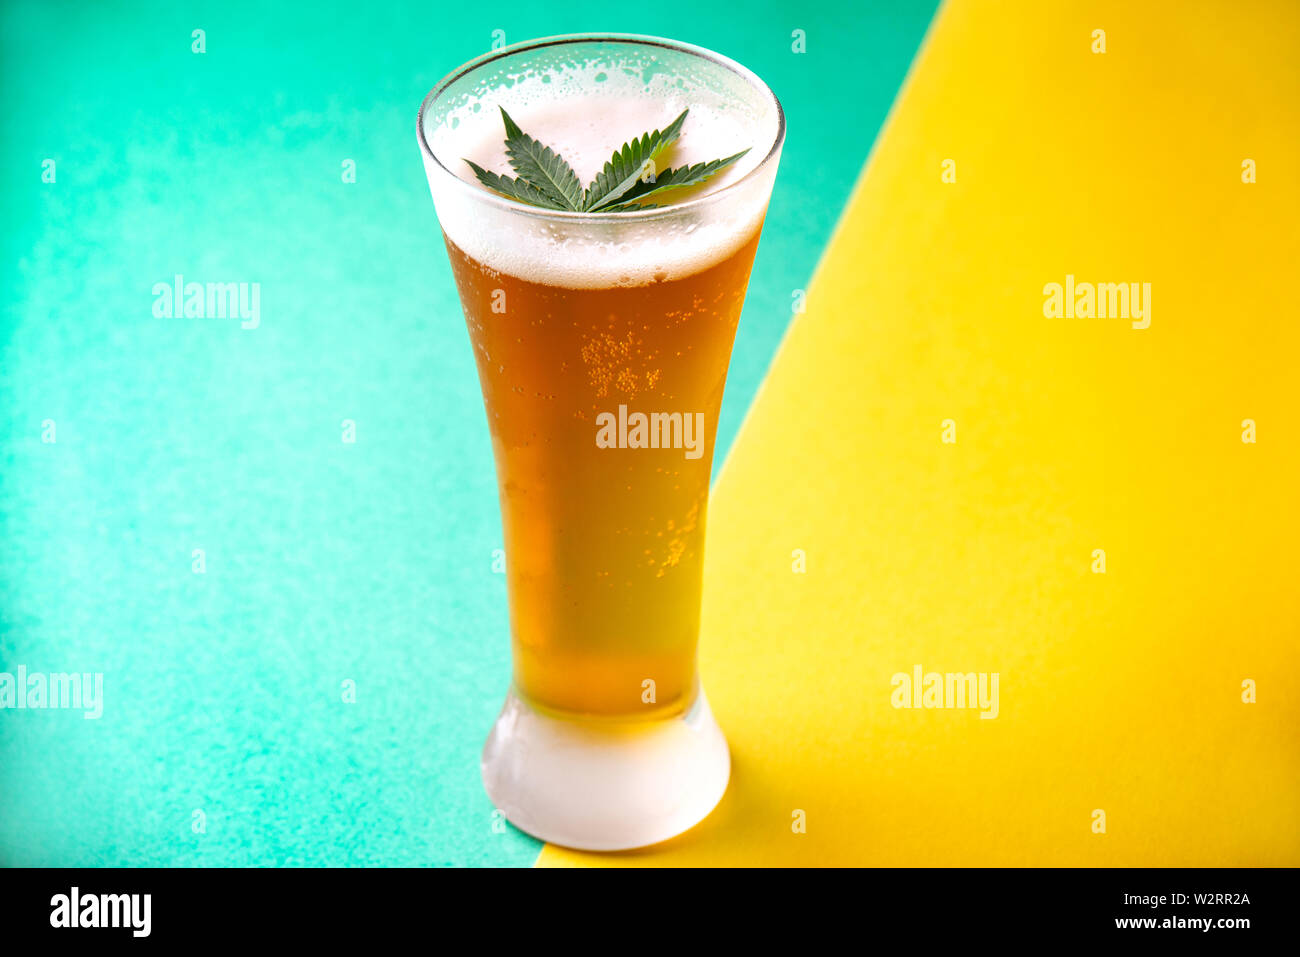 Detail of cold glass of beer with cannabis leaf, marijuana infused beverage concept Stock Photo